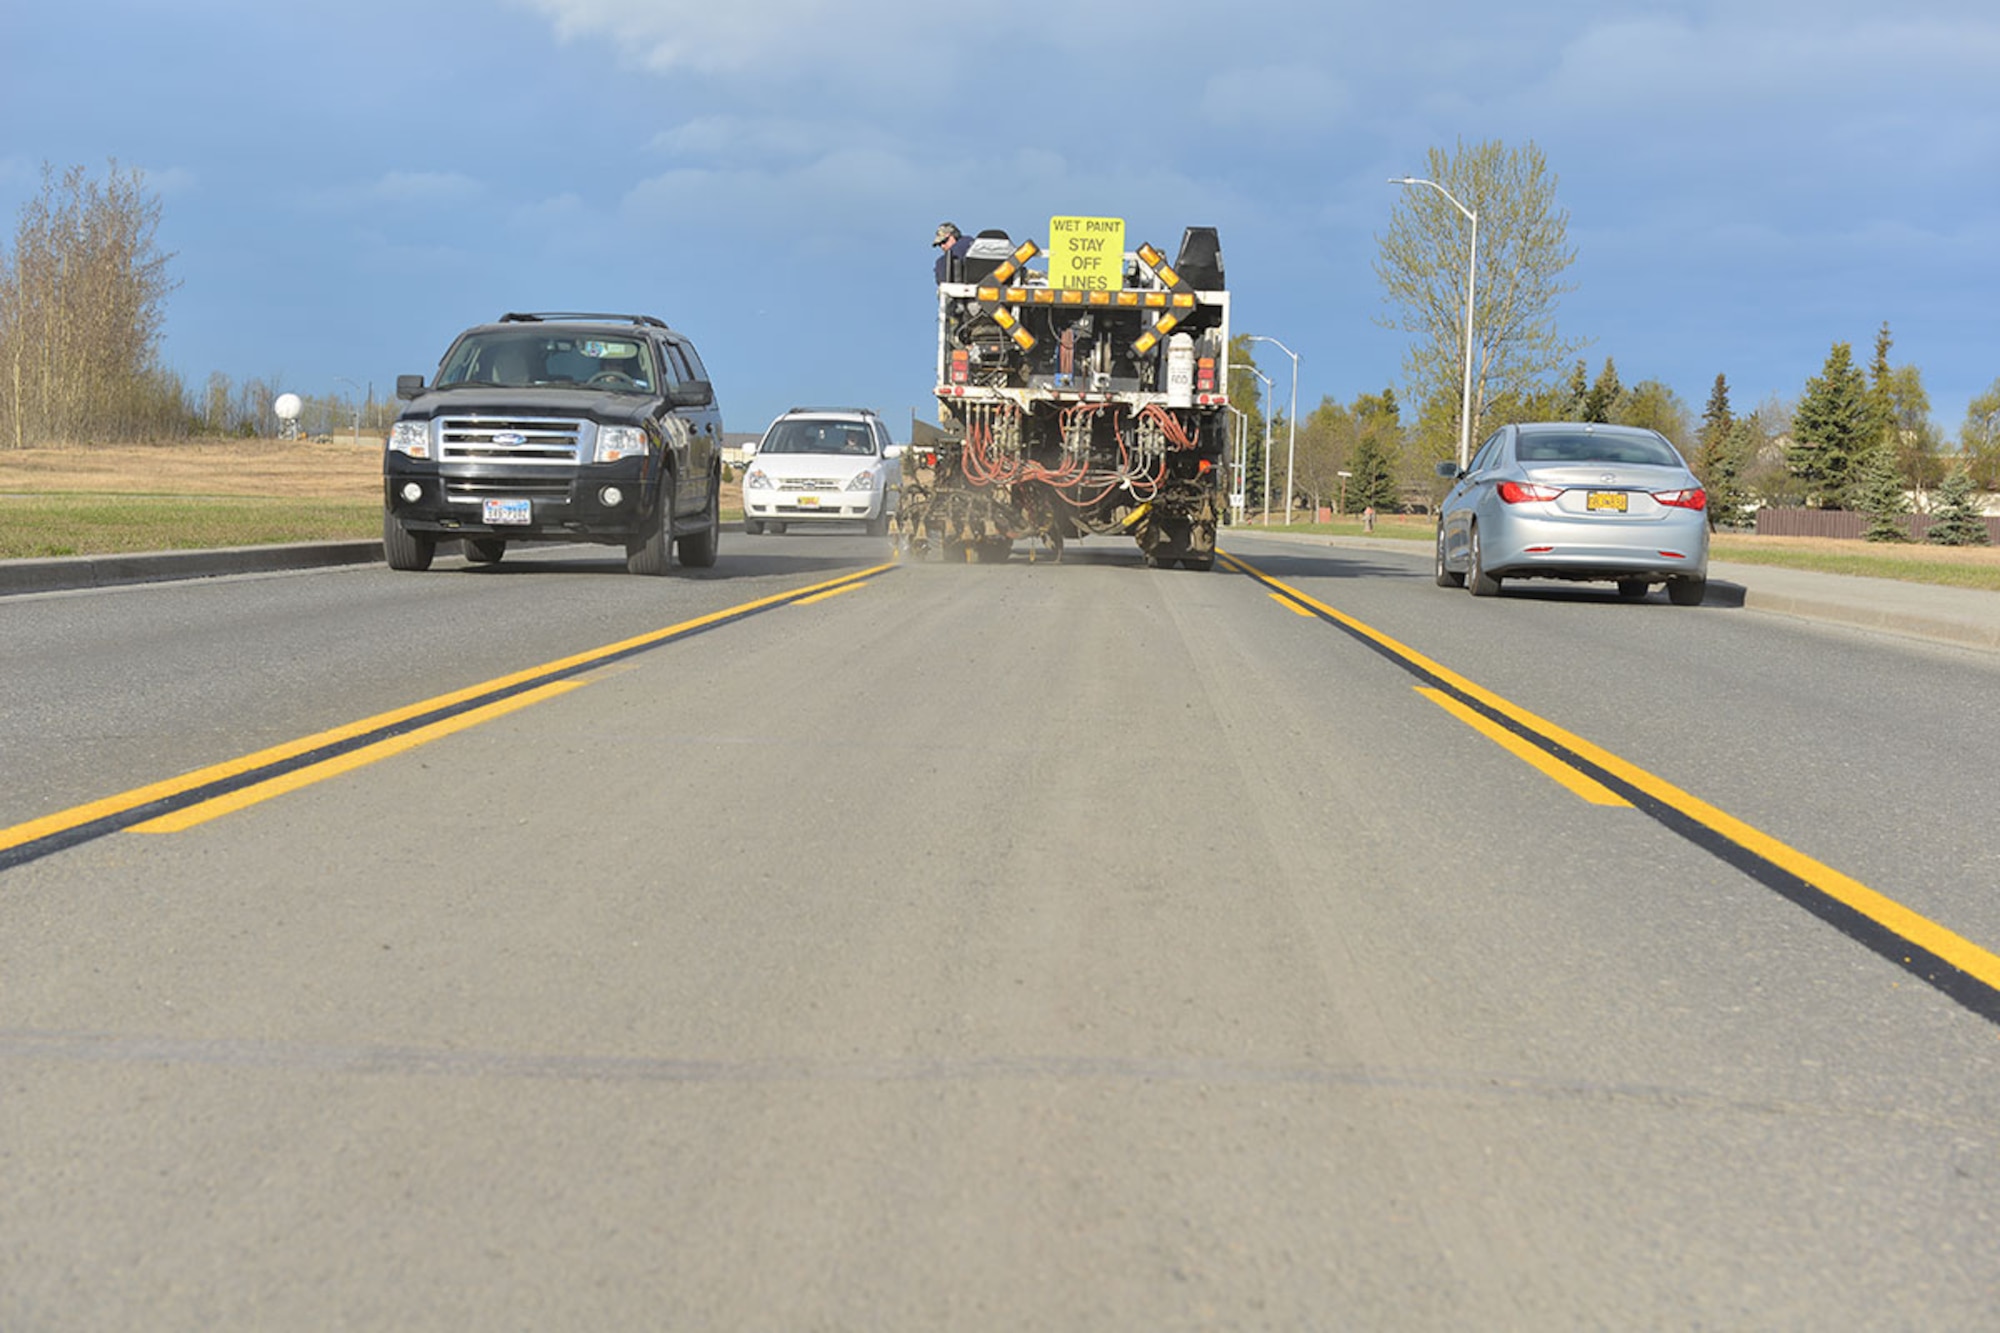 A 773rd Civil Engineering Squadron paint shop striping truck lays down lines on Arctic Warrior Drive while motorists pass on either side. Passing the paint crew is not authorized if they are in the same lane, but in this case the truck is in the turn lane, so motorists should exercise caution when driving by. (U.S. Air Force photo by Airman 1st Class Kyle Johnson)